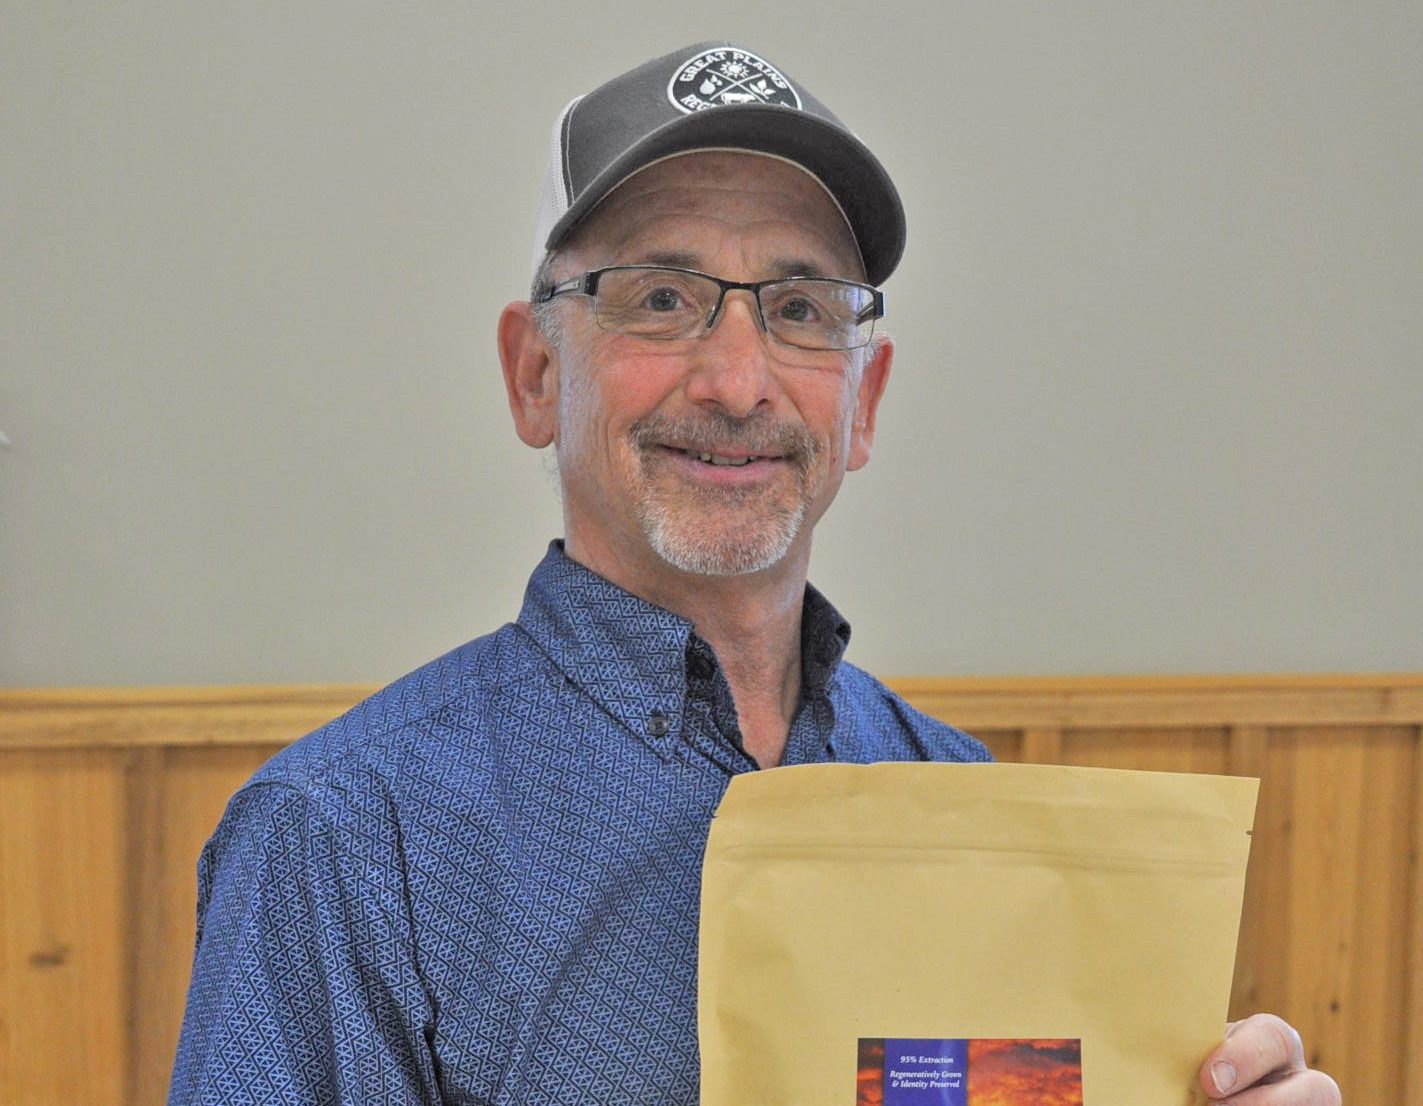 Steve DeWitt’s Willow Creek Farms Pantry product line includes stoneground flour made from Oklahoma State University wheat varieties Butler’s Gold and Big Country, as well as a pancake and waffle mix. (Photo Candace Krebs)